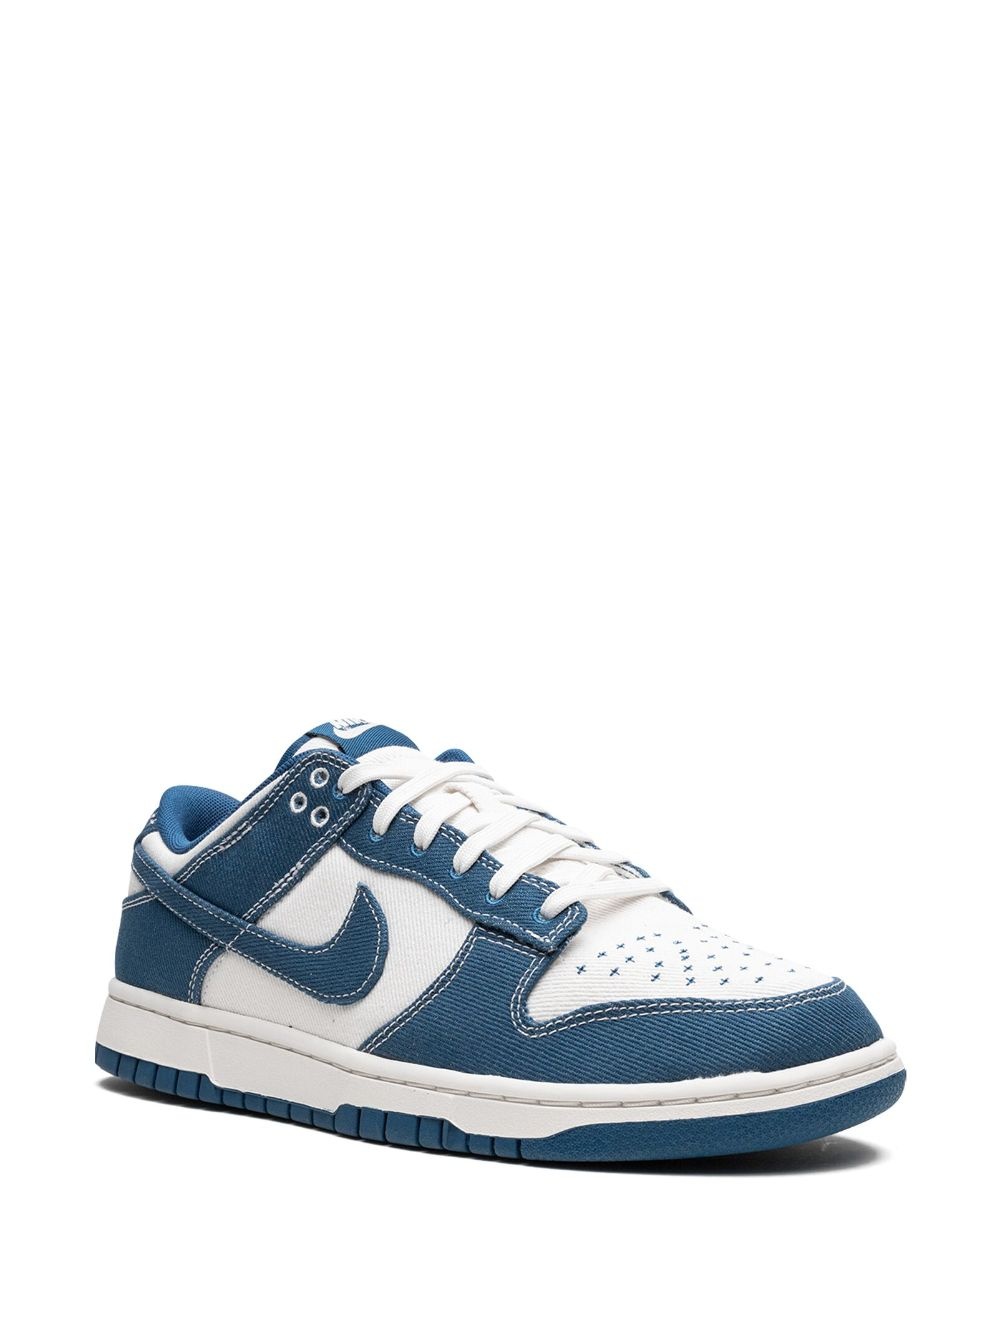 Dunk Low Shashiko "Industrial Blue" sneakers - 2